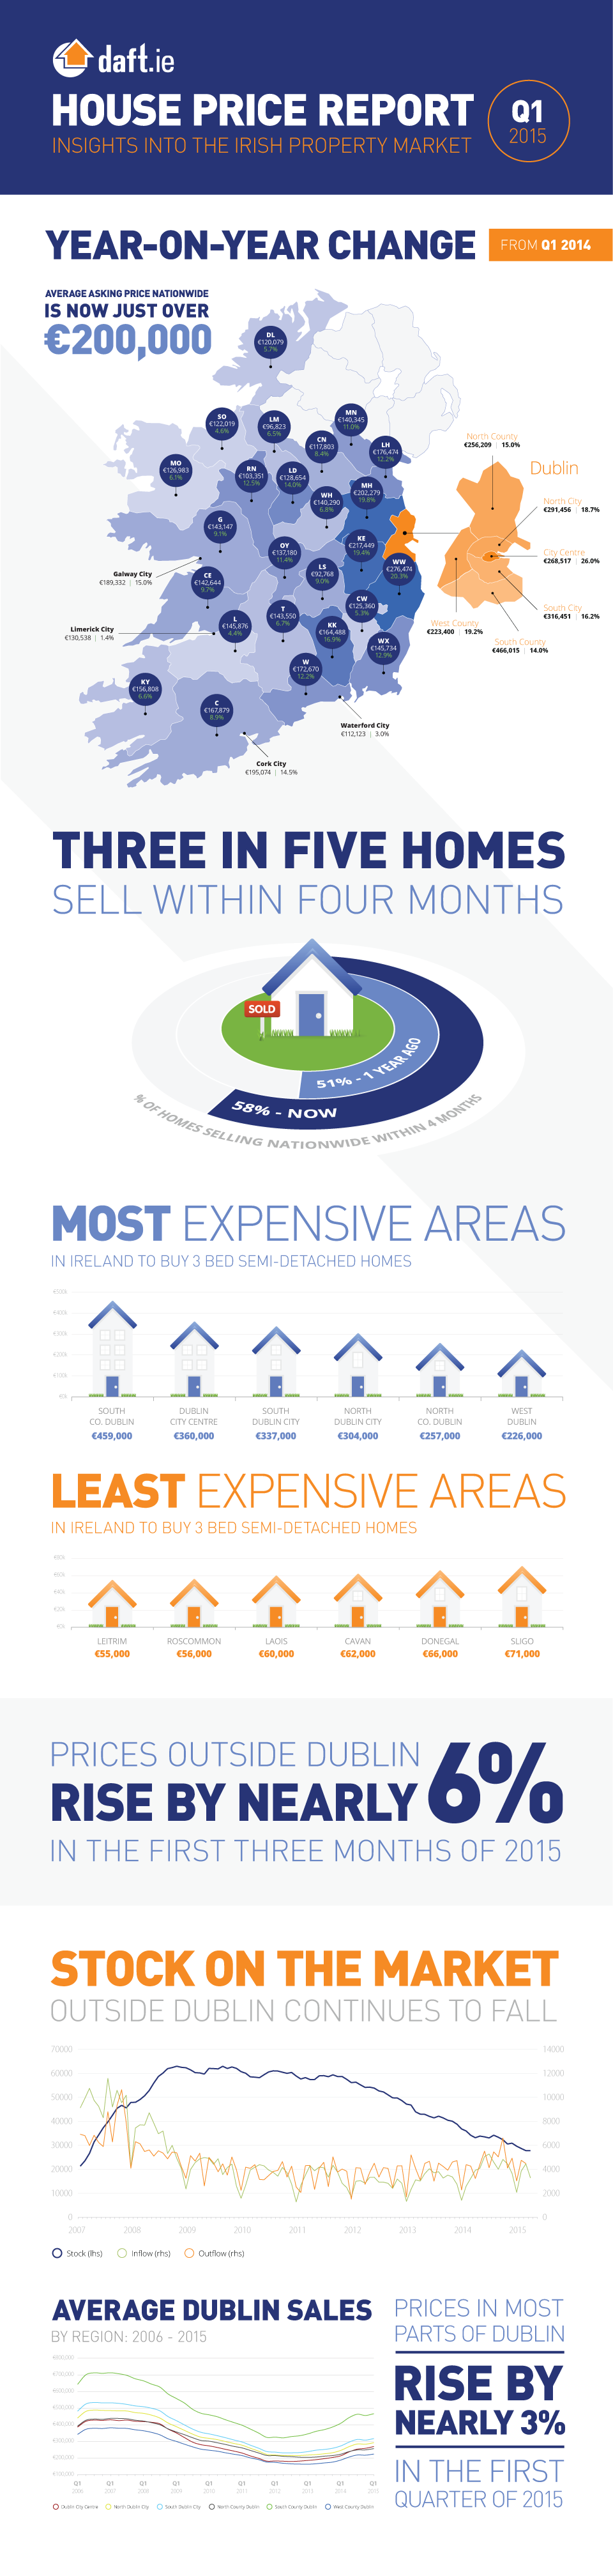 Daft.ie House Price Report: Q1 2015 Infographic